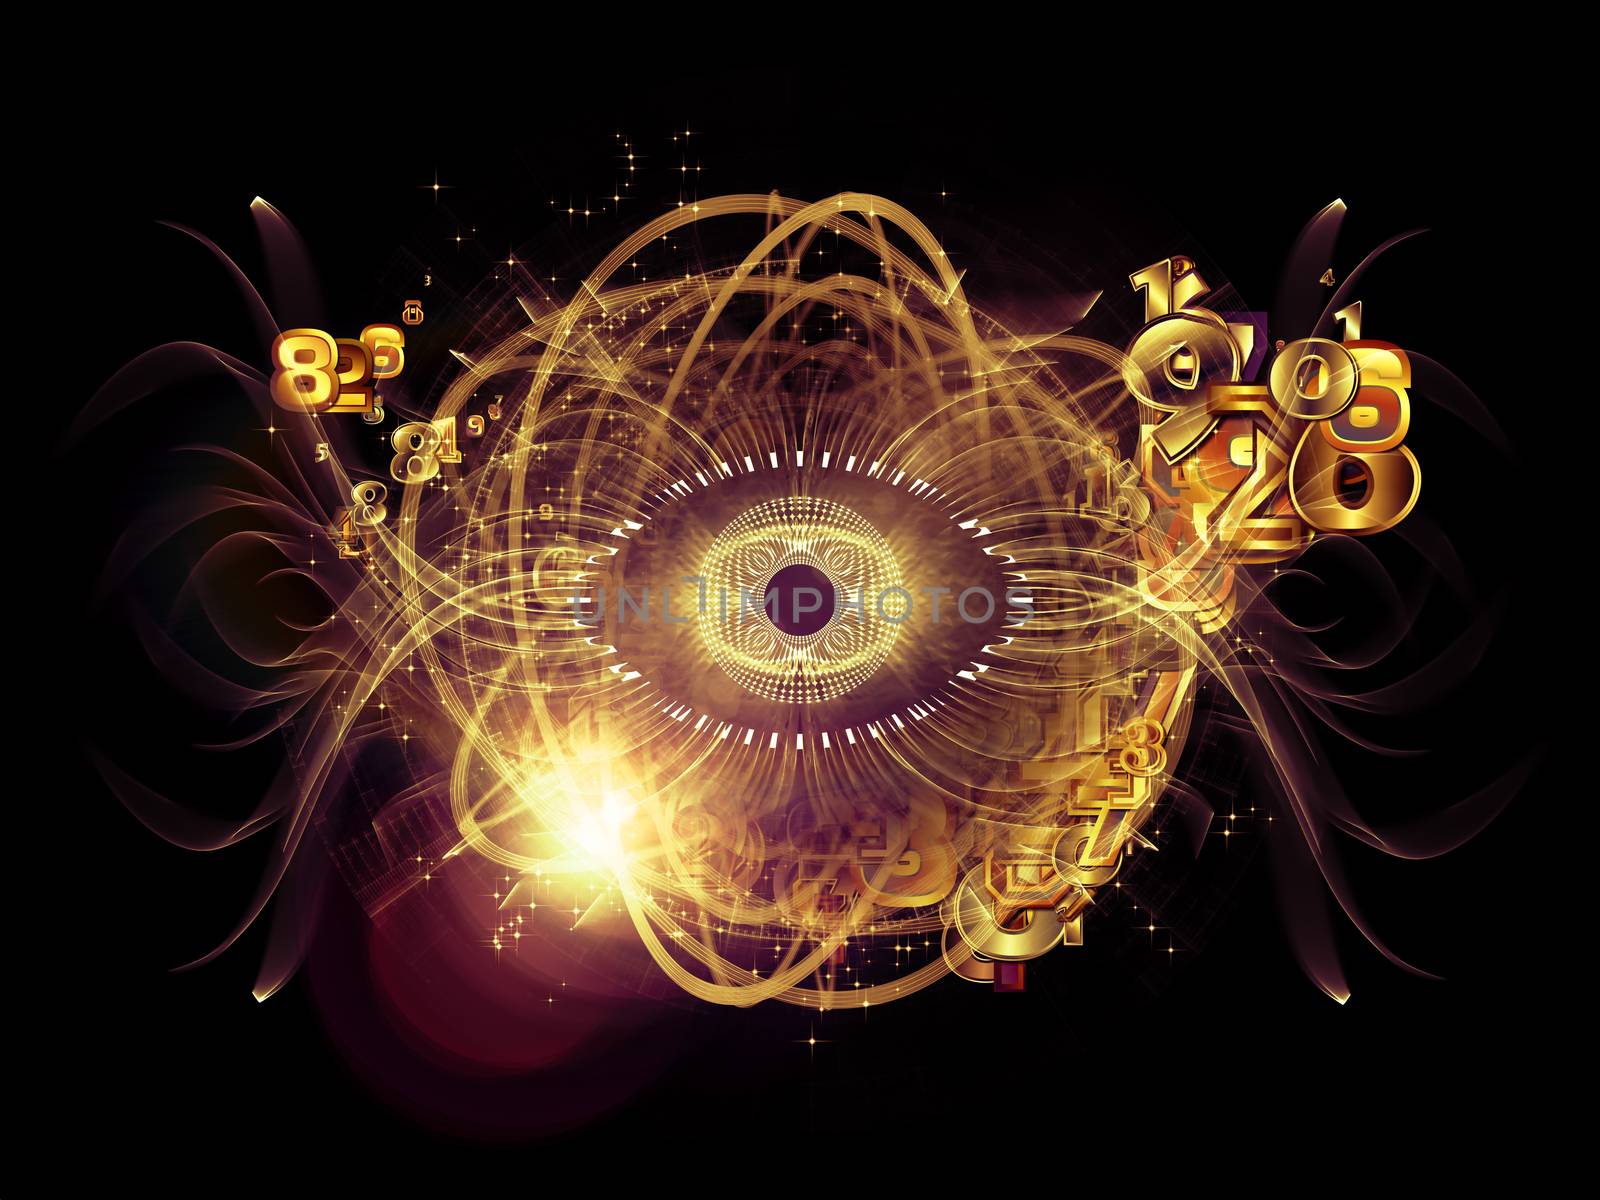 Eye Particle series. Design composed of eye shape, numbers and fractal elements as a metaphor on the subject of spirituality, science and  technology